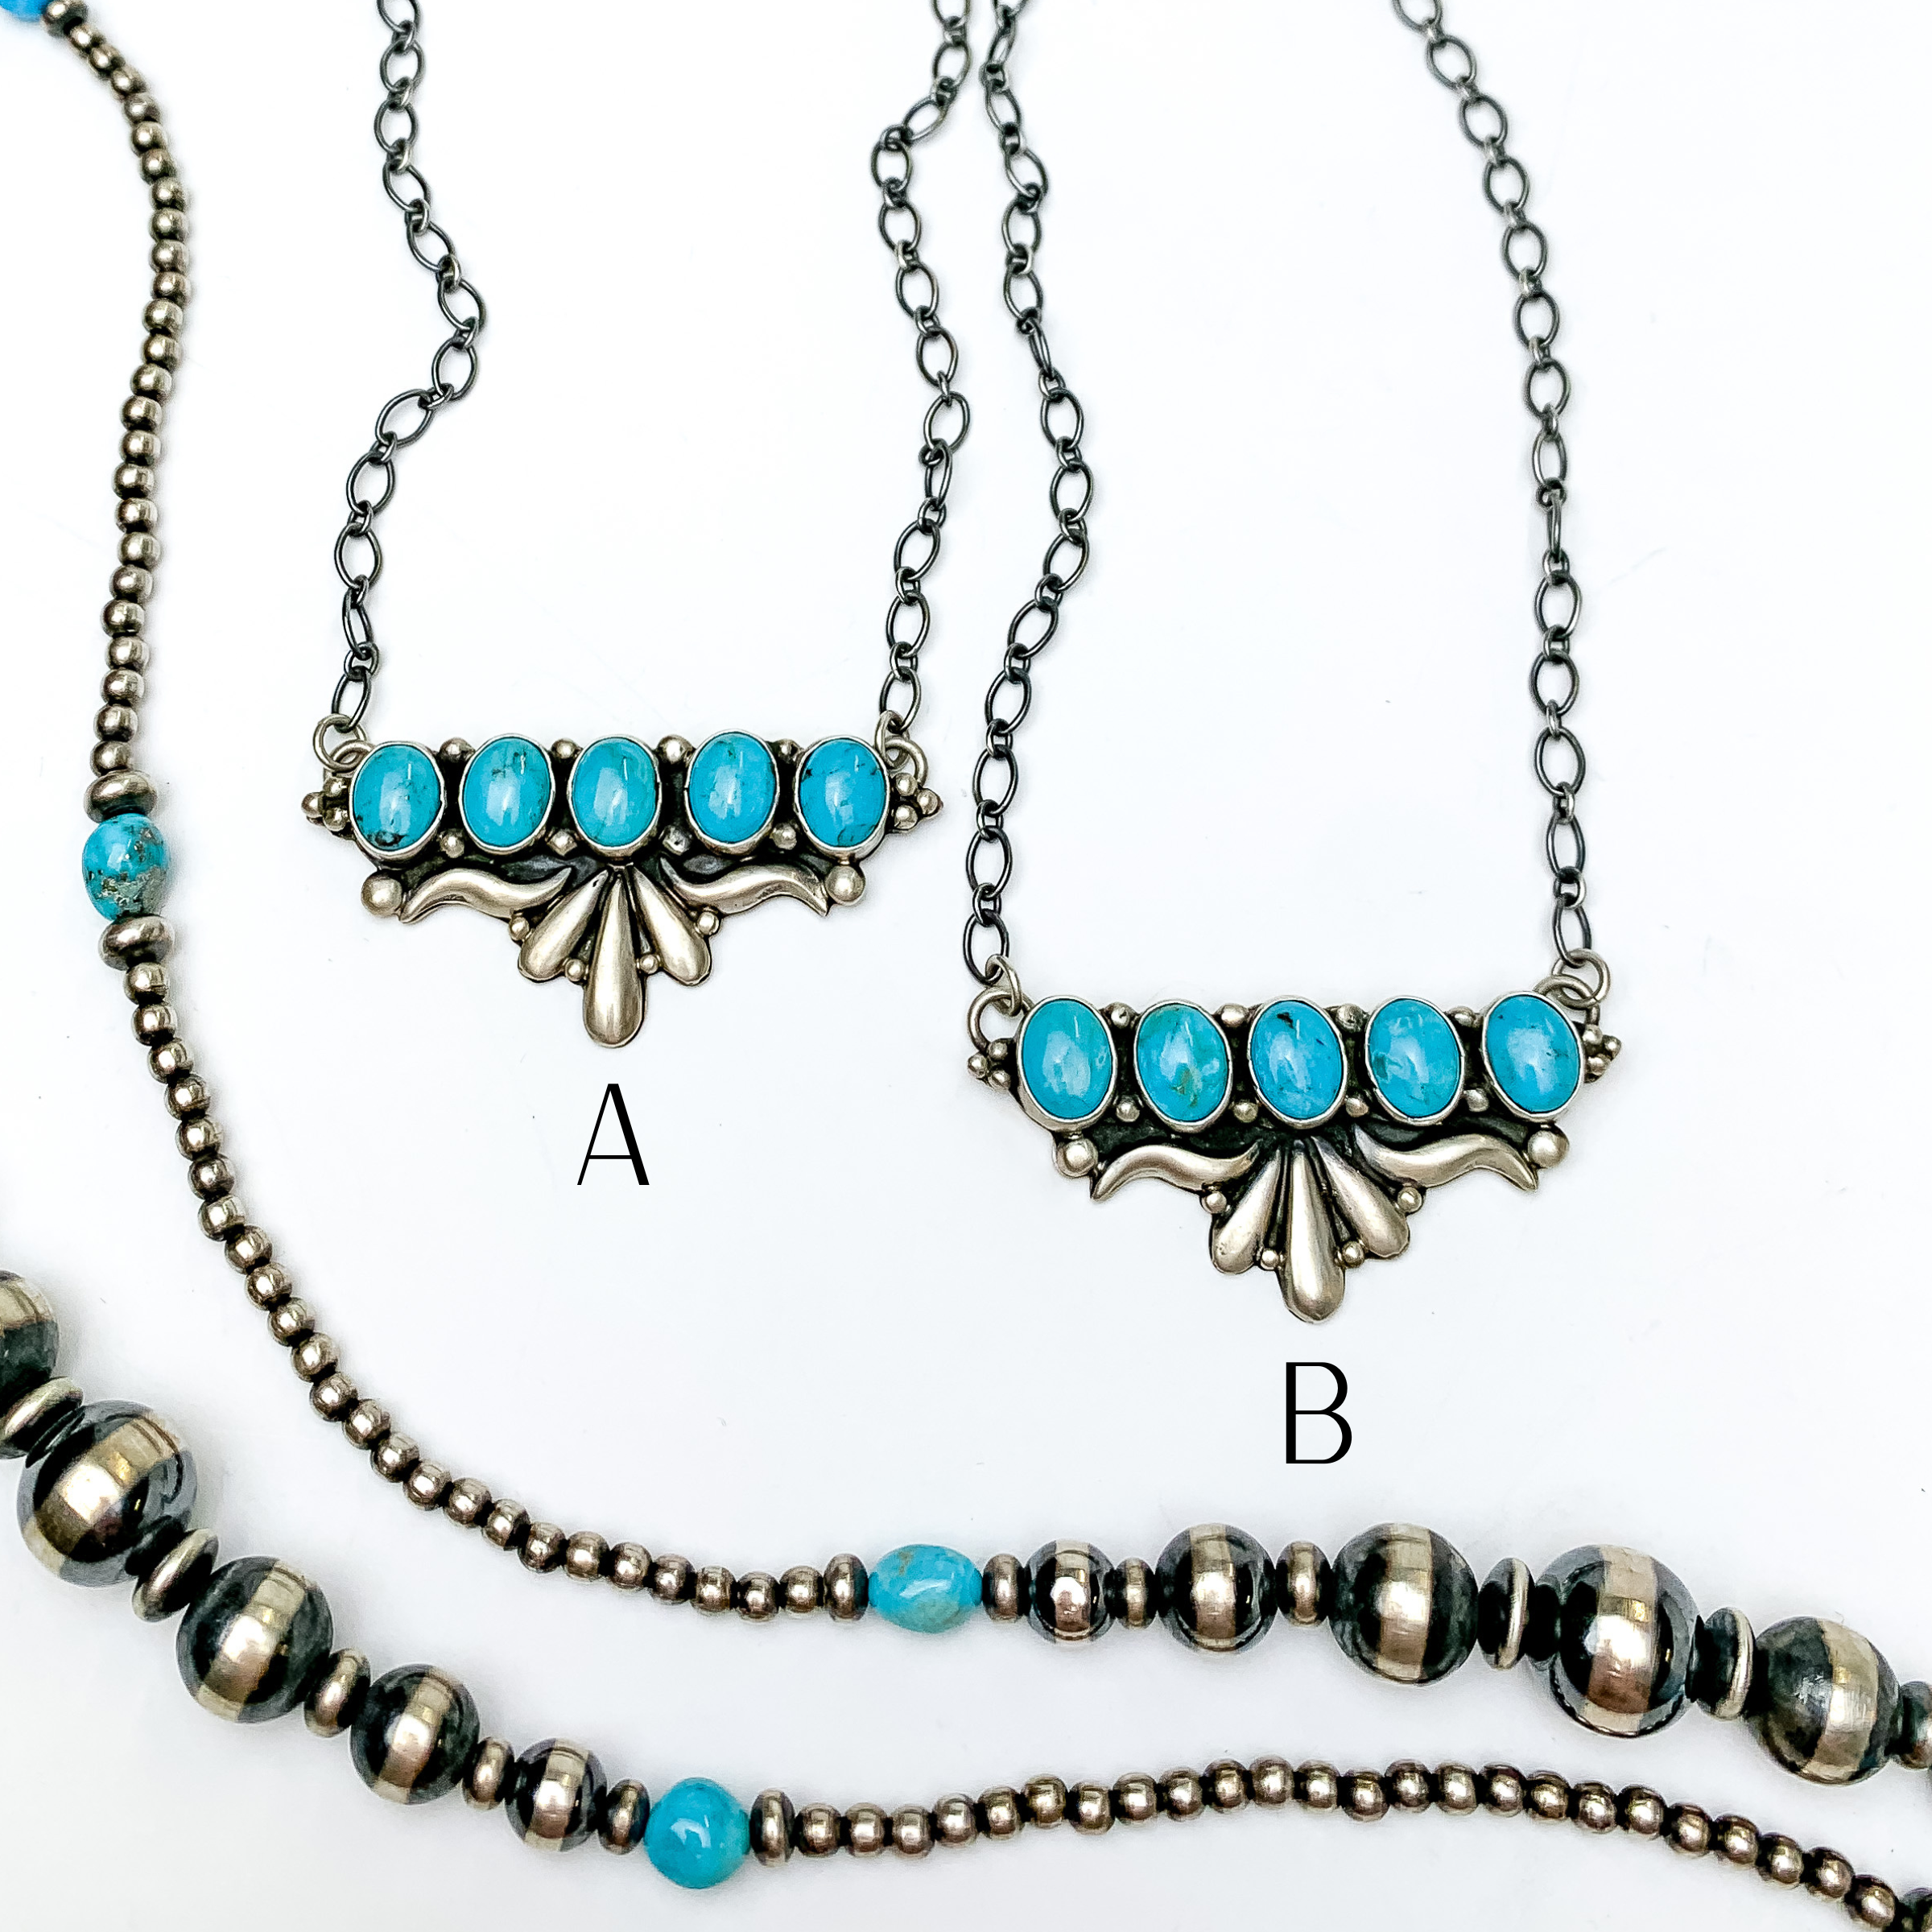 E Richards | Navajo Handmade Sterling Silver Chain Necklace with Silverwork and 5 Turquoise Stones - Giddy Up Glamour Boutique